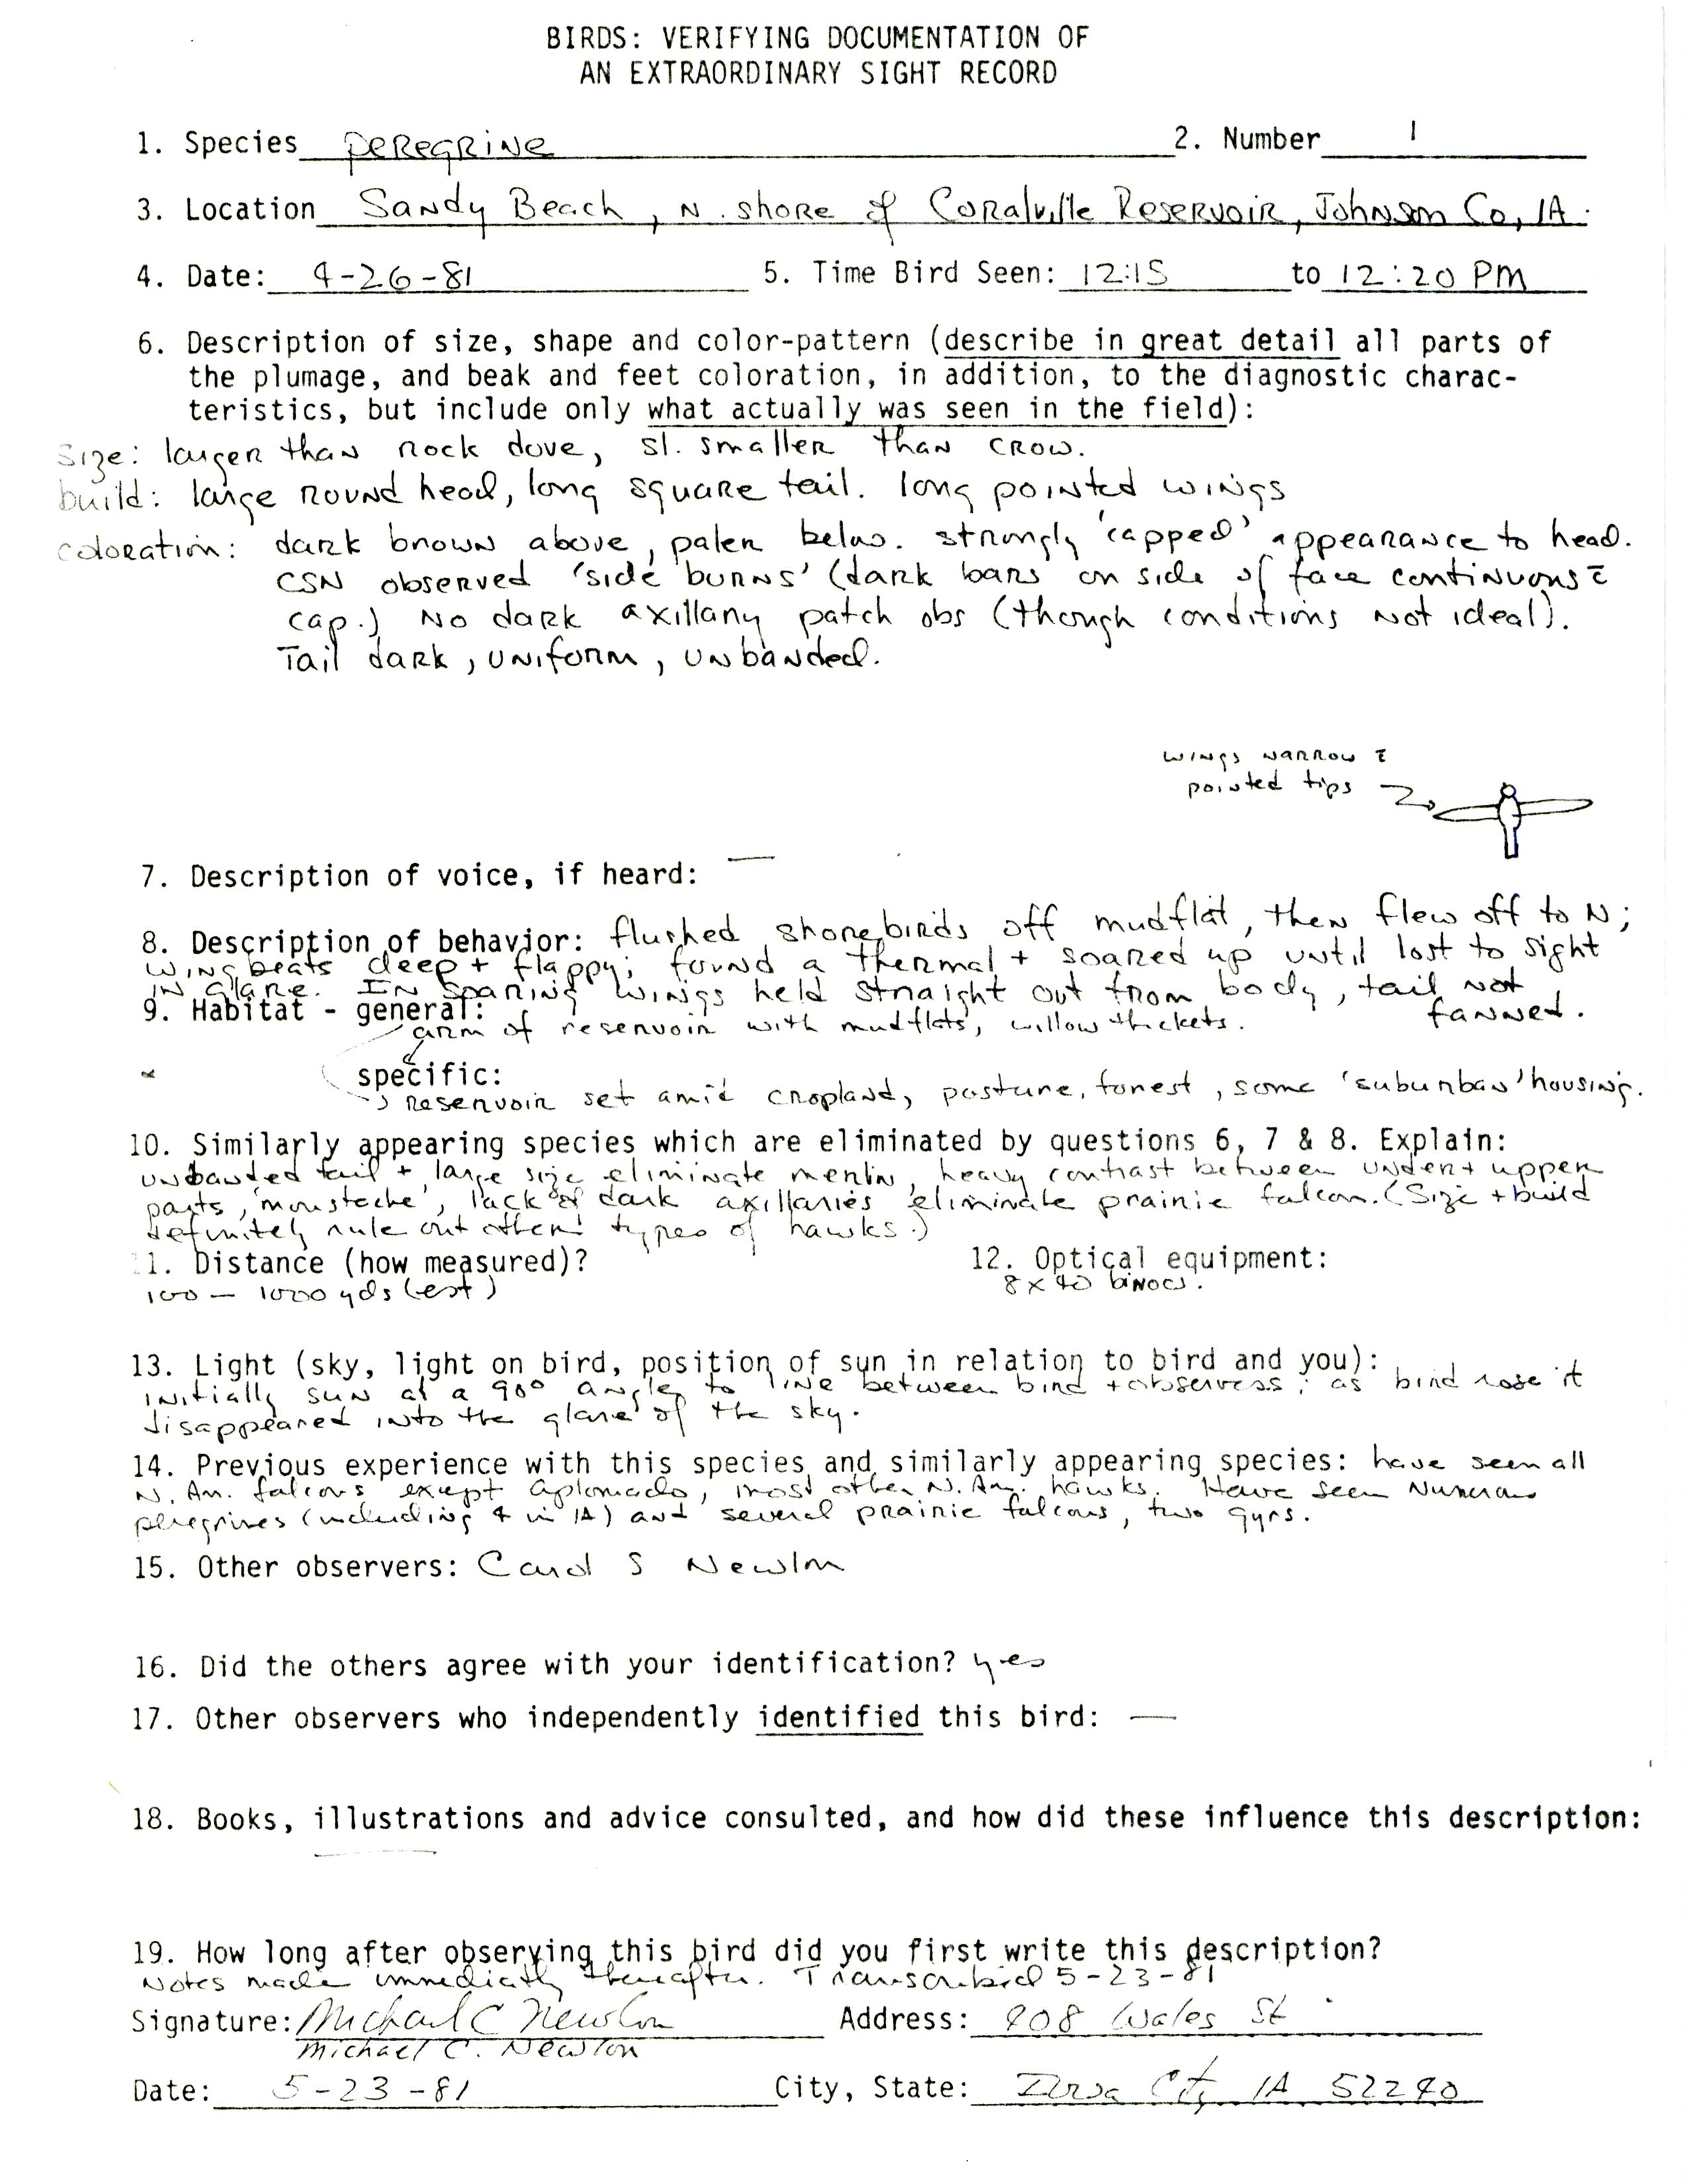 Rare bird documentation form for Peregrine Falcon at Sandy Beach at Coralville Reservoir, 1981